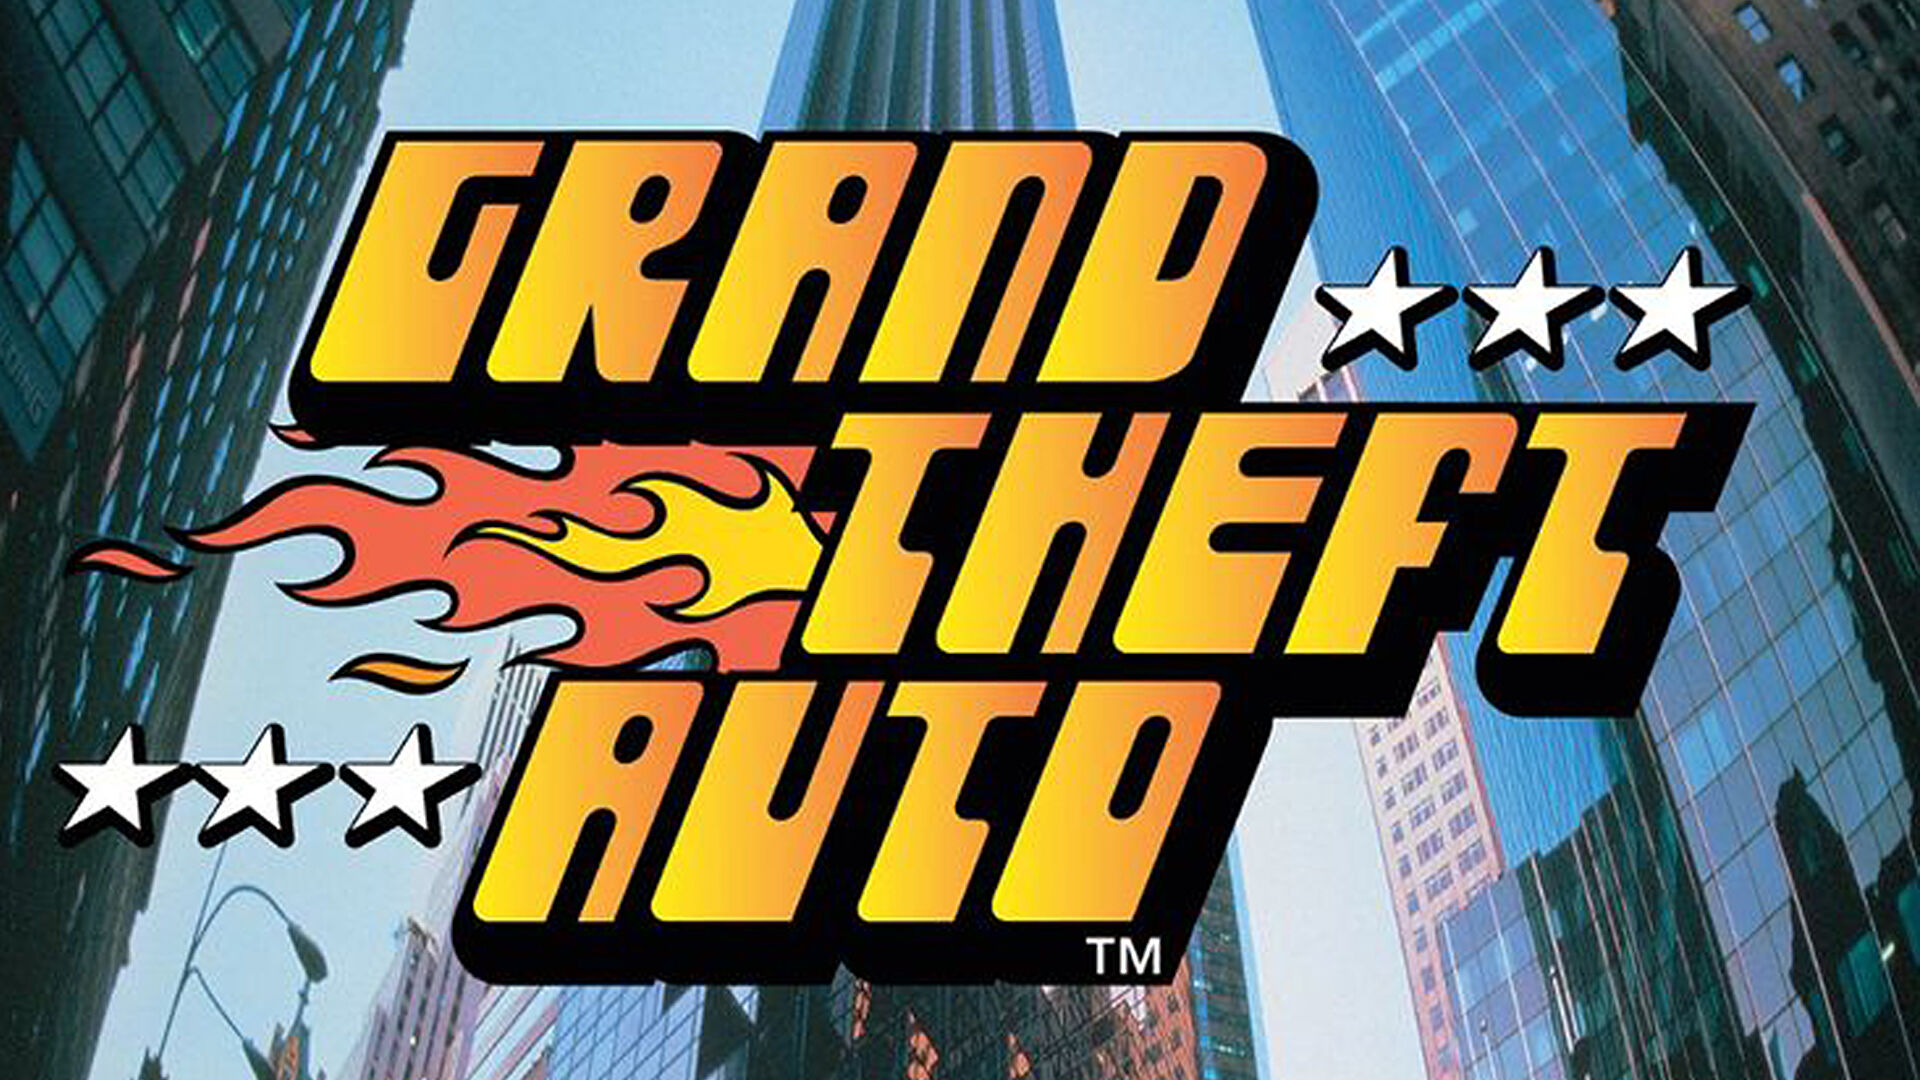 Rockstar is taking down prototype Grand Theft Auto videos released by one of the game’s creators